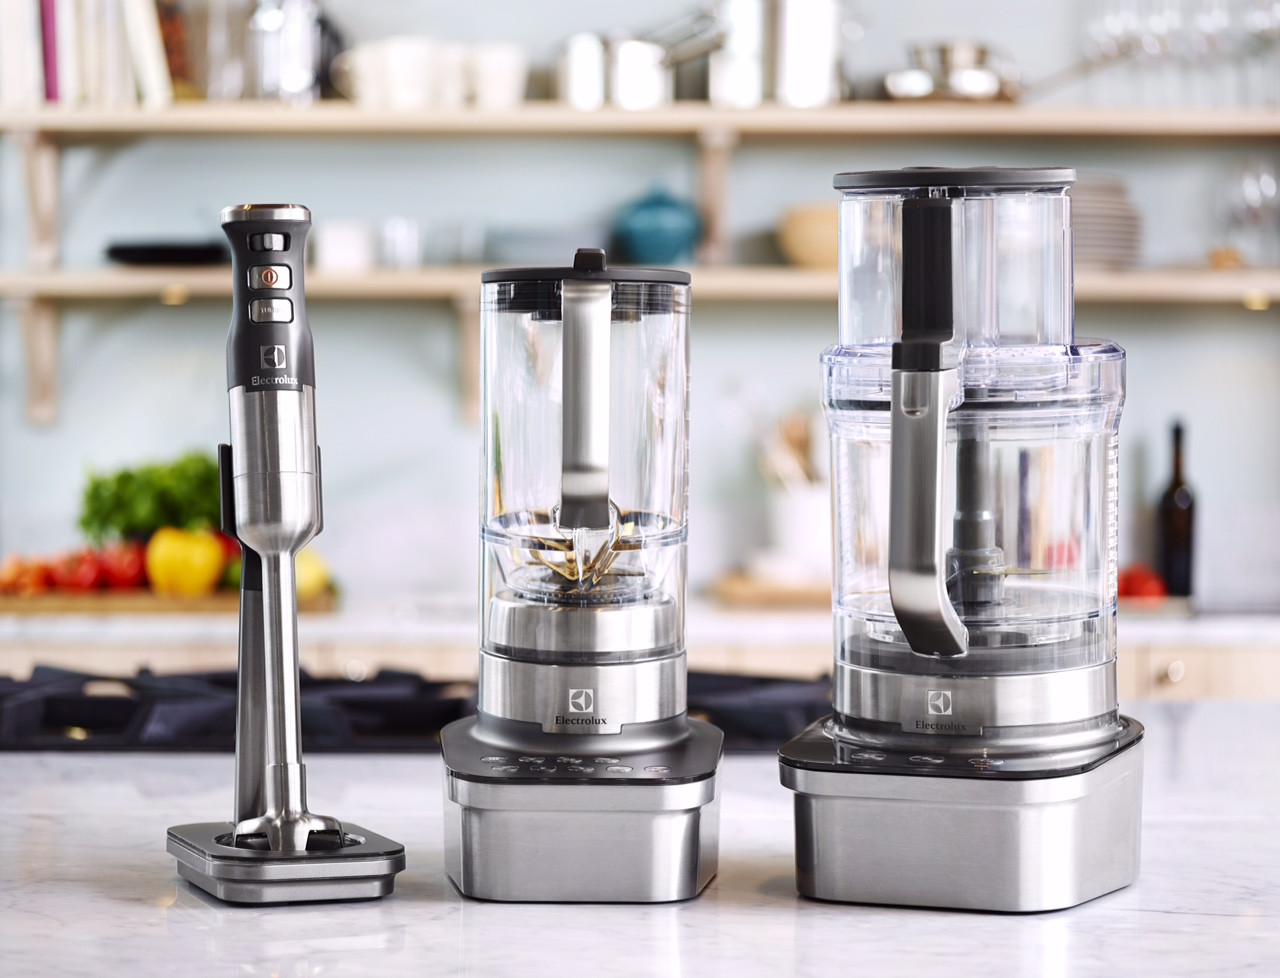 Kitchen Small Appliances
 Electrolux Introduces State of the Art Small Kitchen